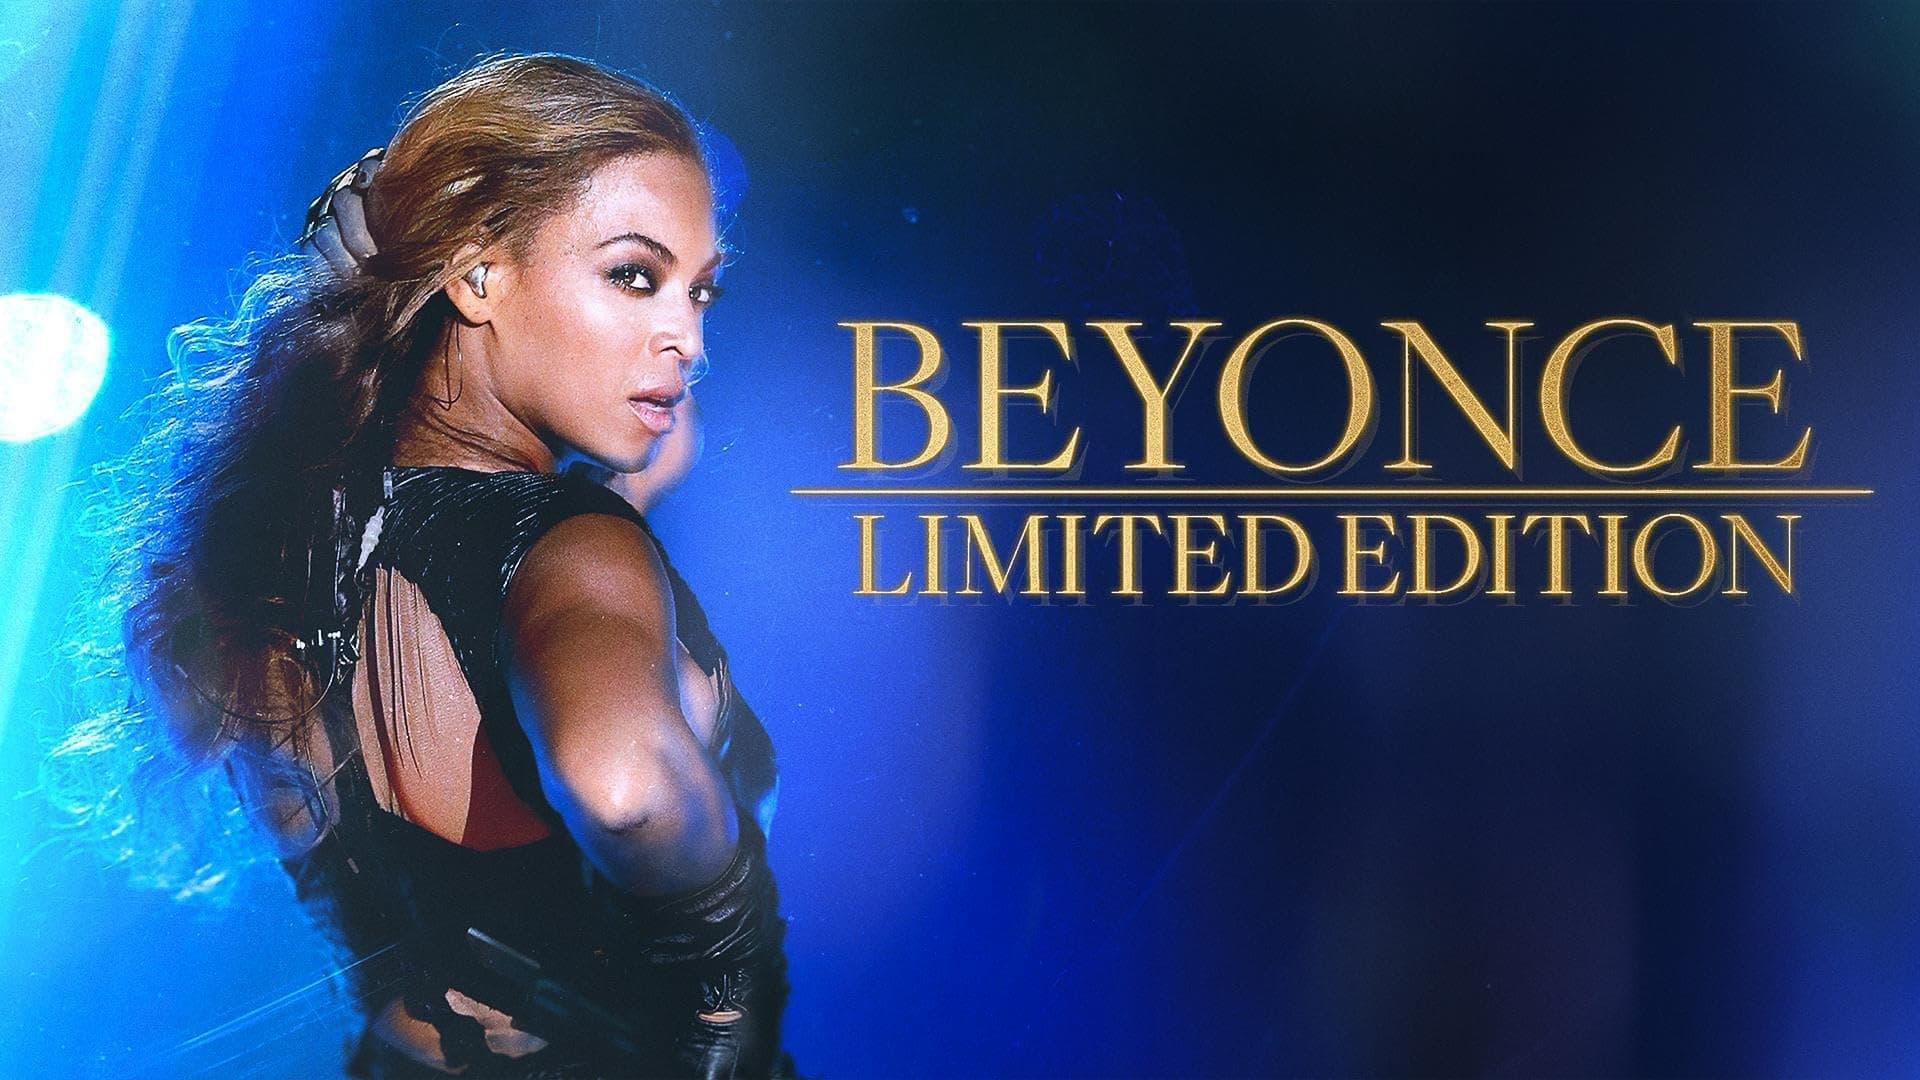 Beyonce: Limited Edition backdrop